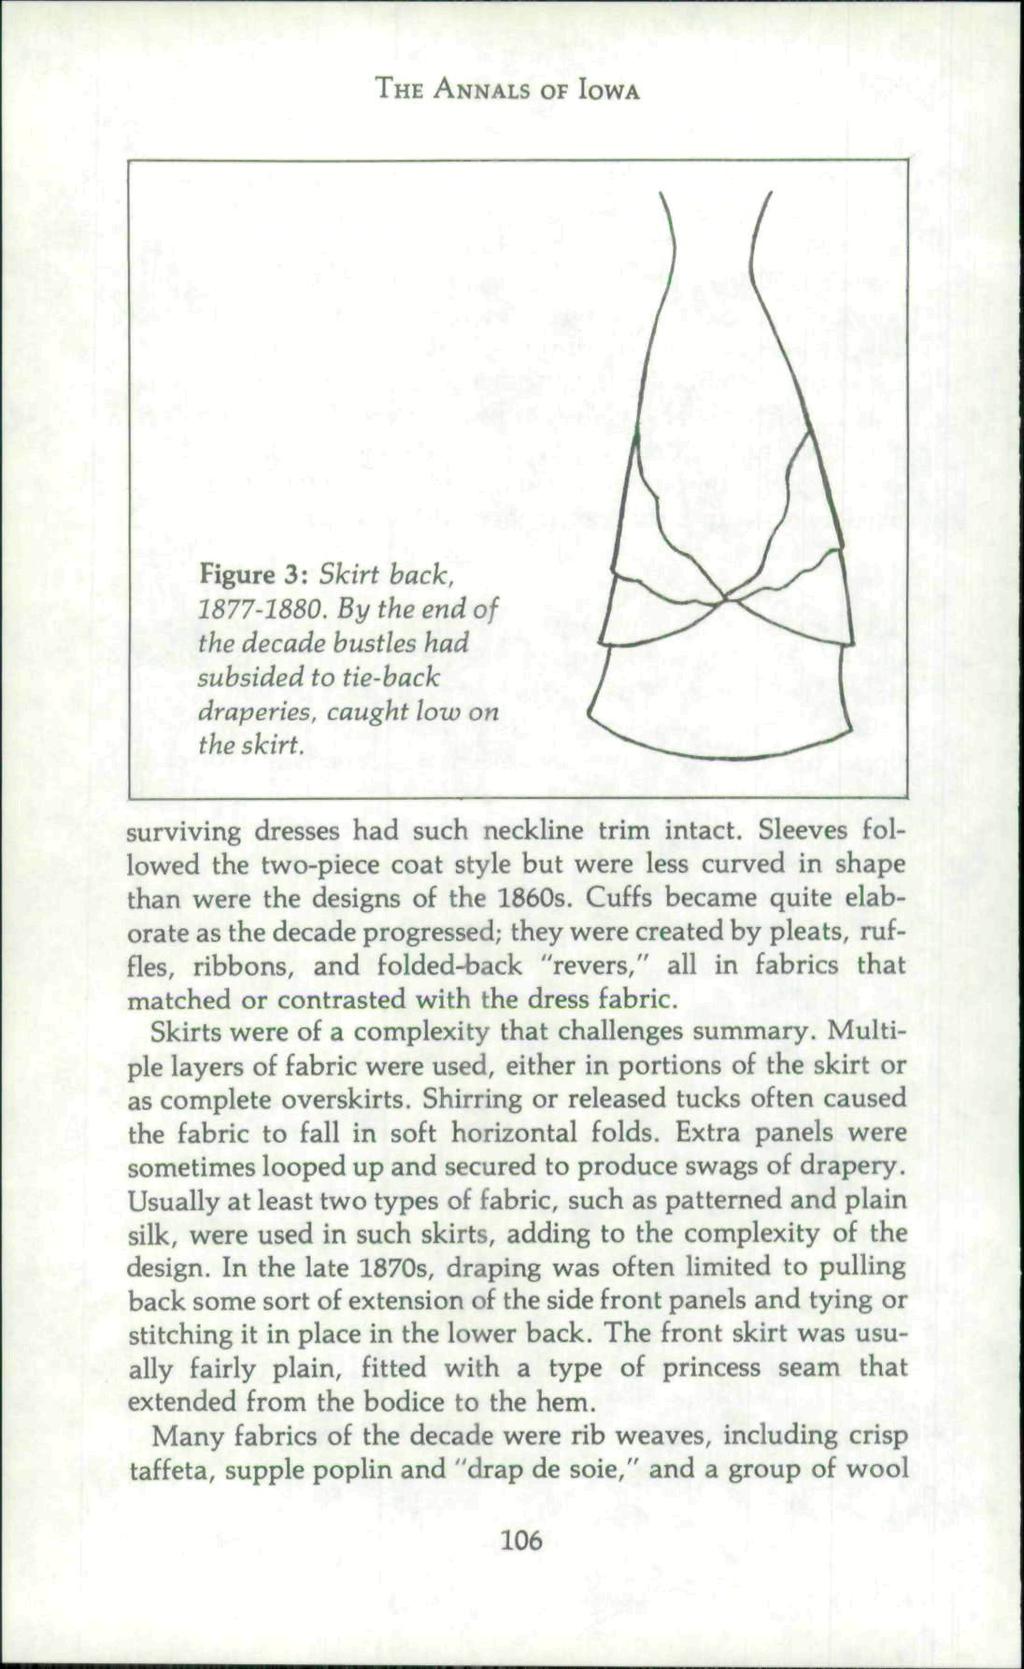 THE ANNALS OF IOWA Figure 3: Skirt back. 1877-1880. By the end of the decade bustles had subsided to tie-back draperies, caught low on the skirt. surviving dresses had such neckline trim intact.